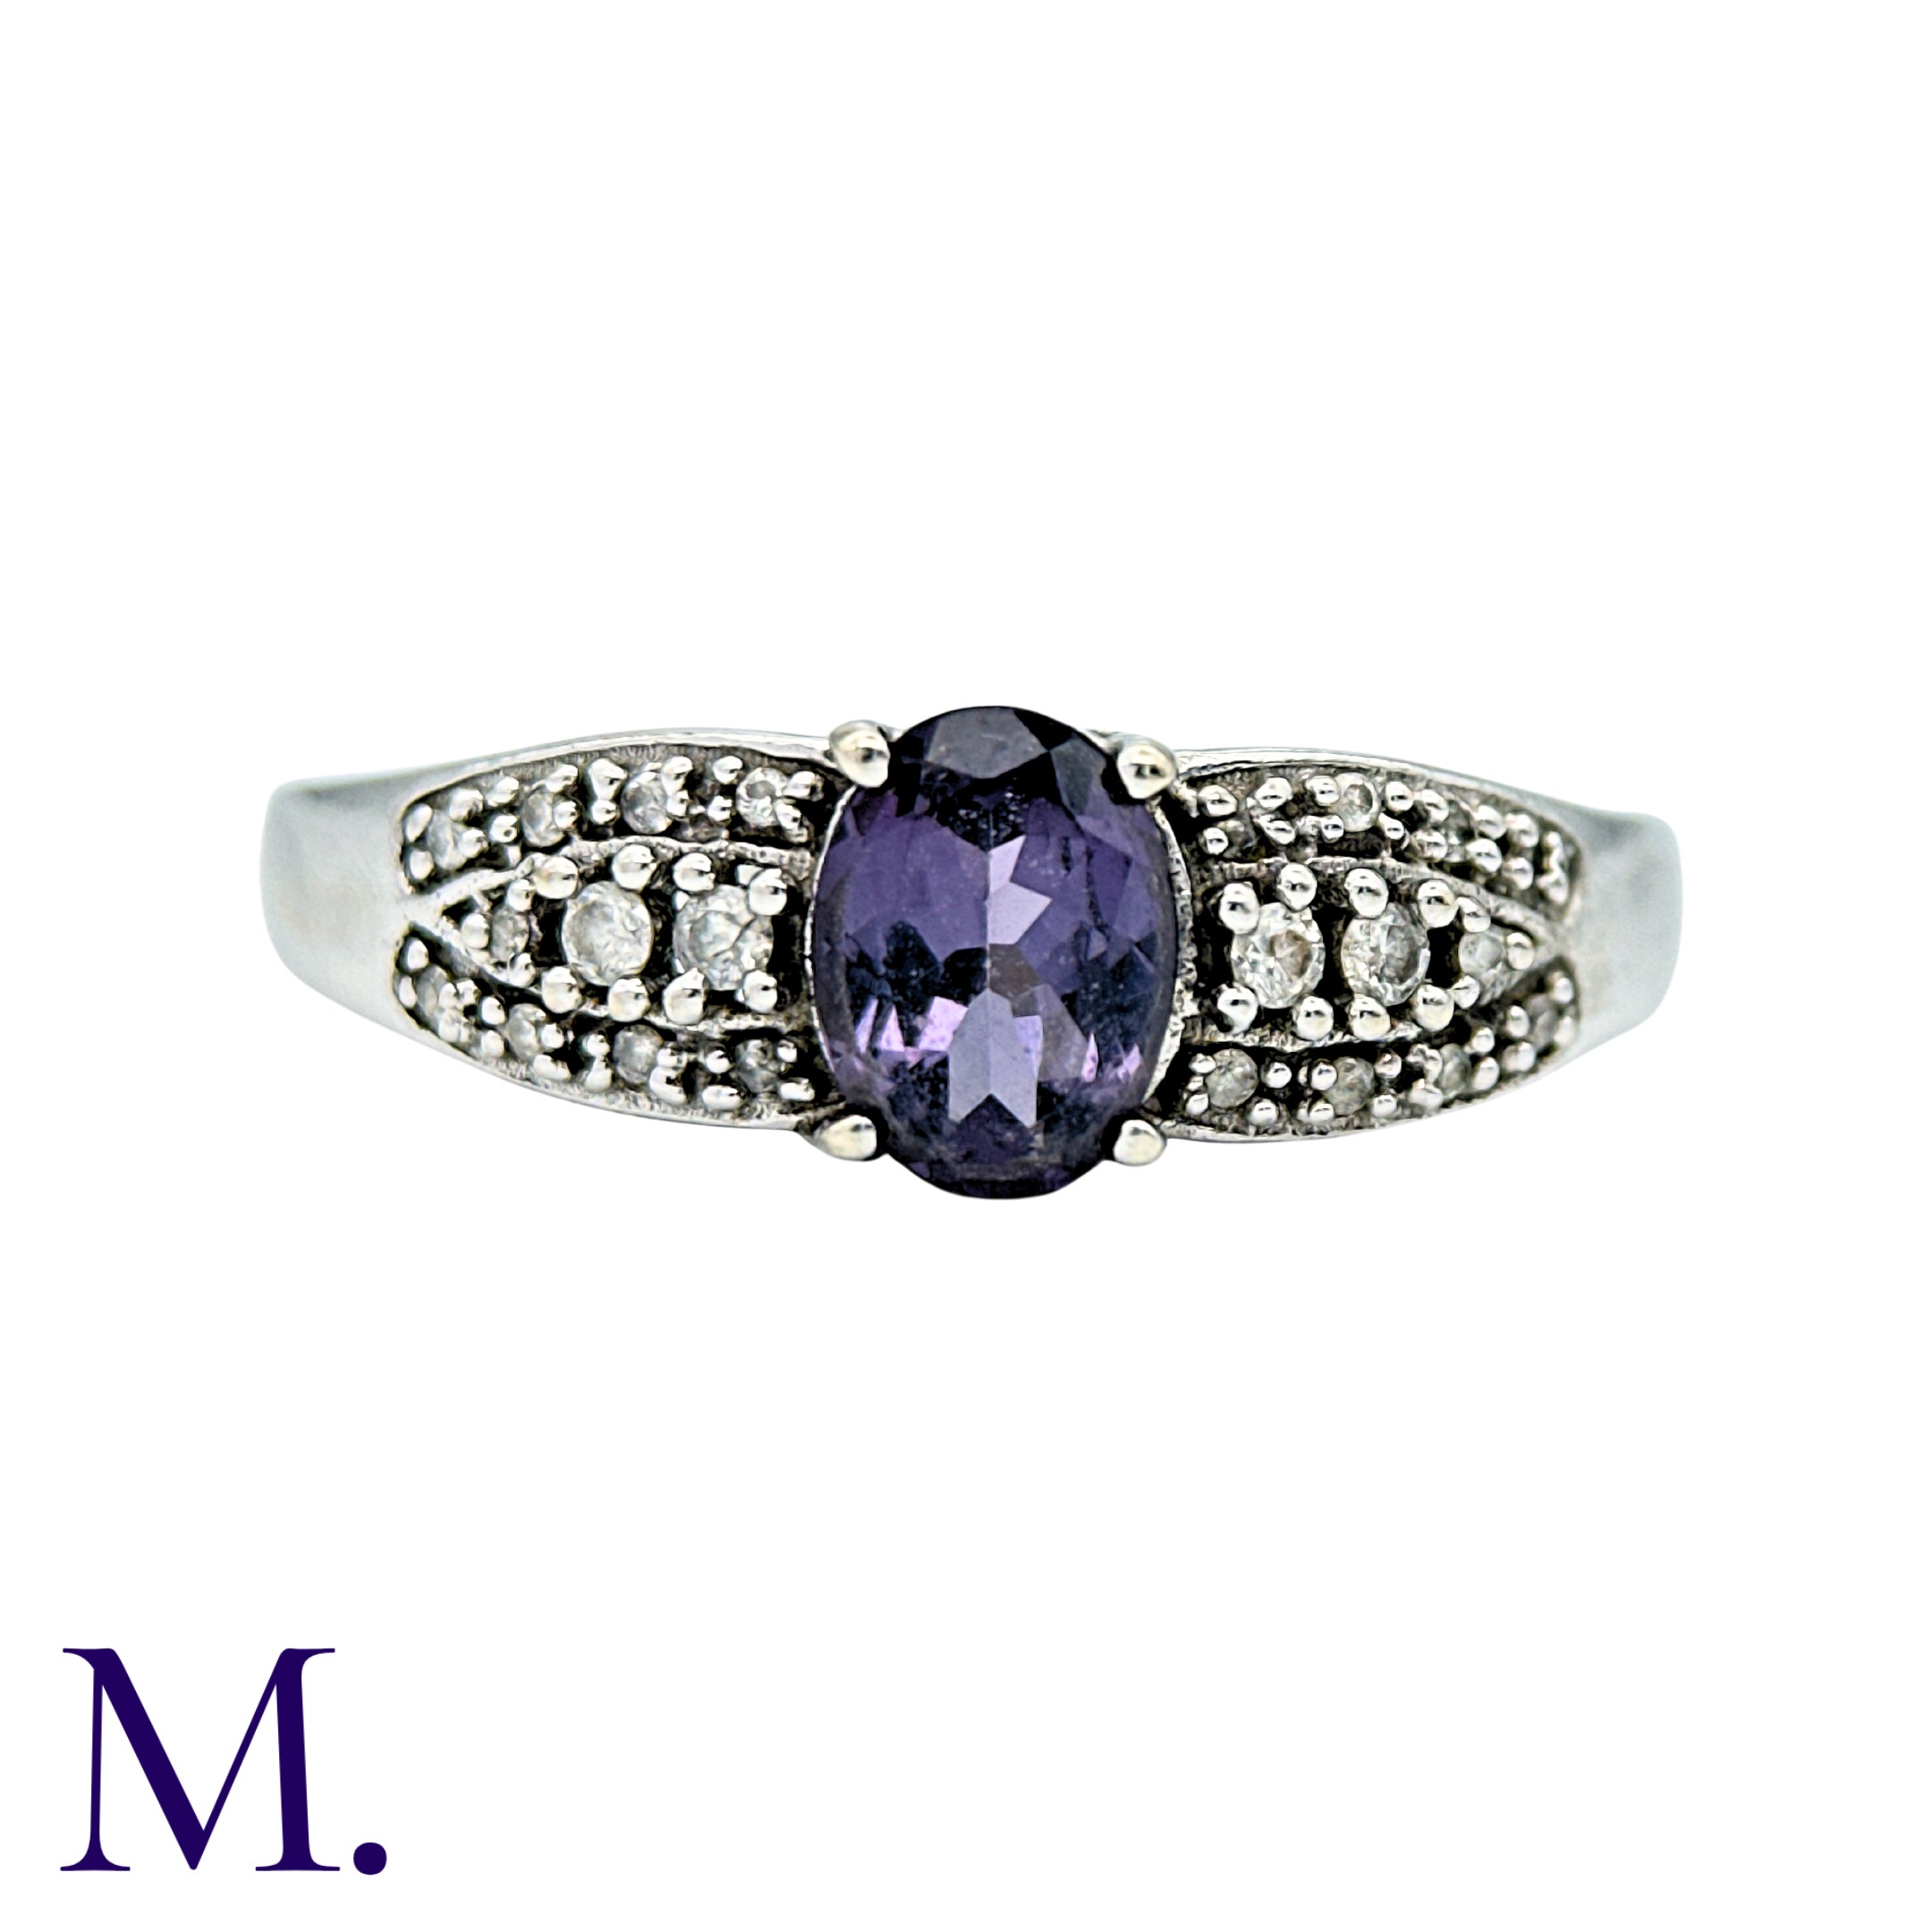 A Purple Sapphire And Diamond Ring in 9k white gold, set with an oval cut purple sapphire with